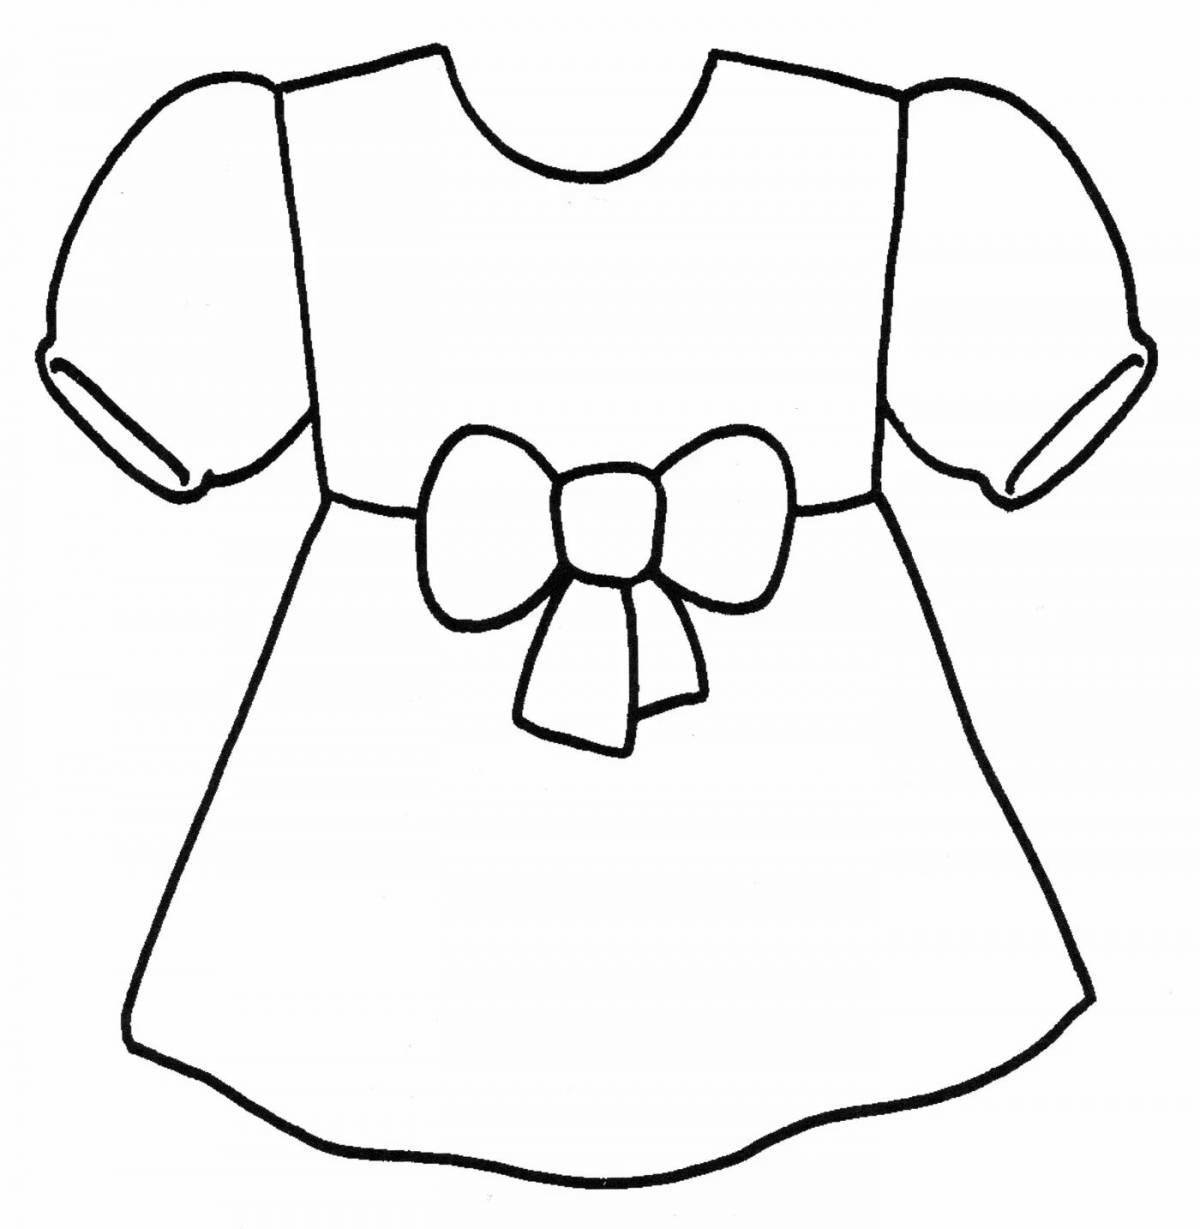 Coloring page funny doll dress for children 4-5 years old